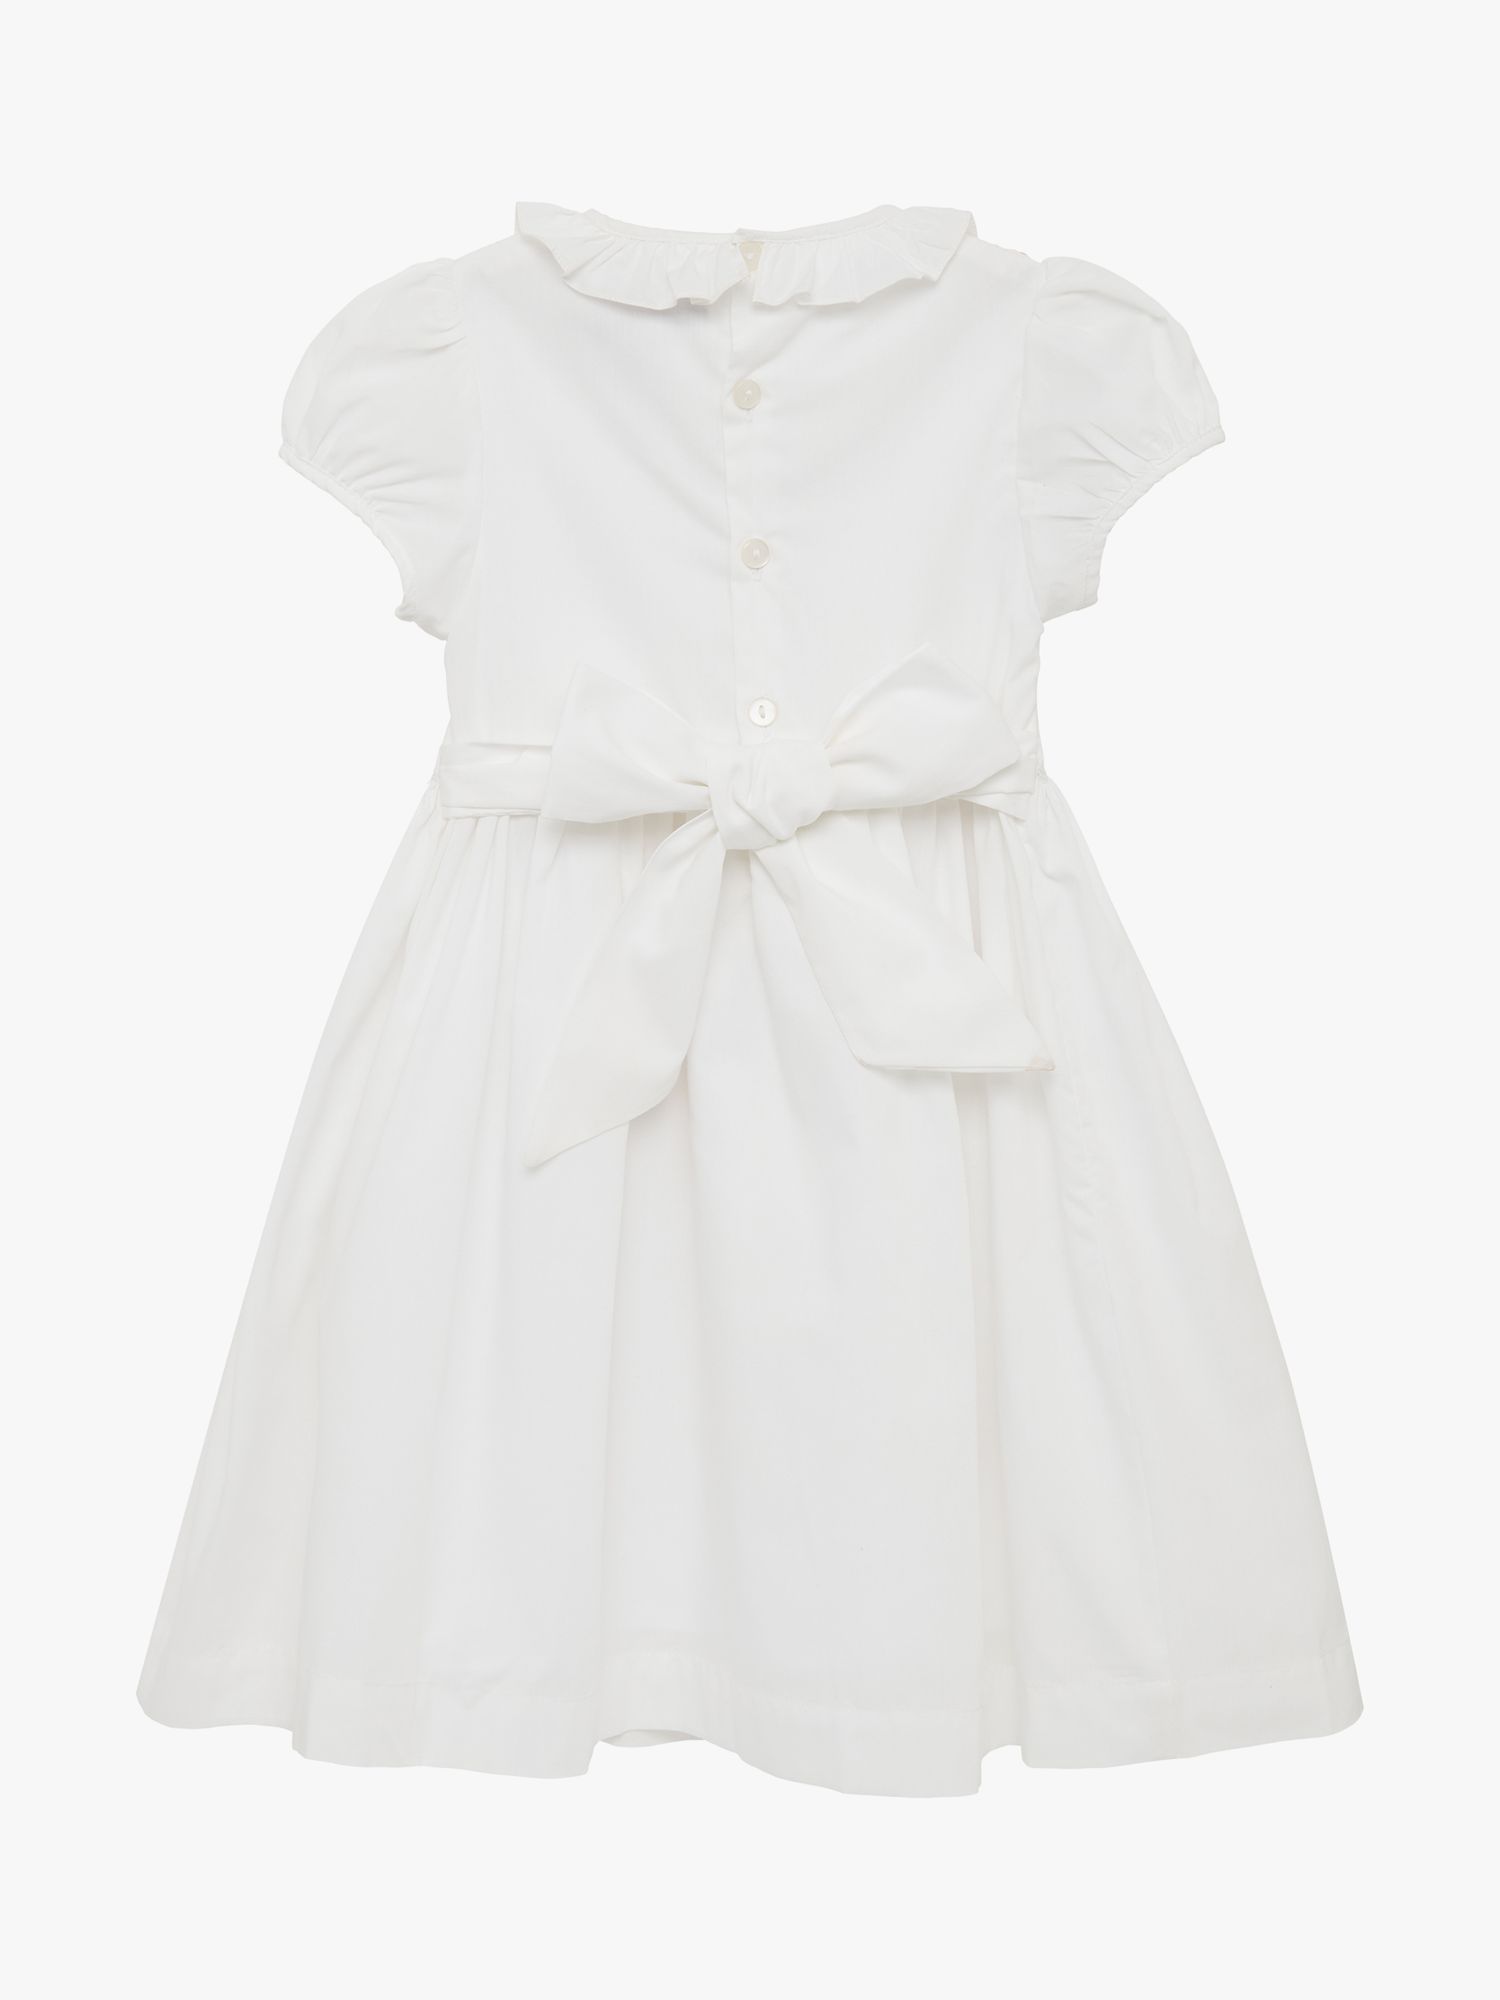 Trotters Willow Baby Hand Smocked Bodice Dress, White, 2 years